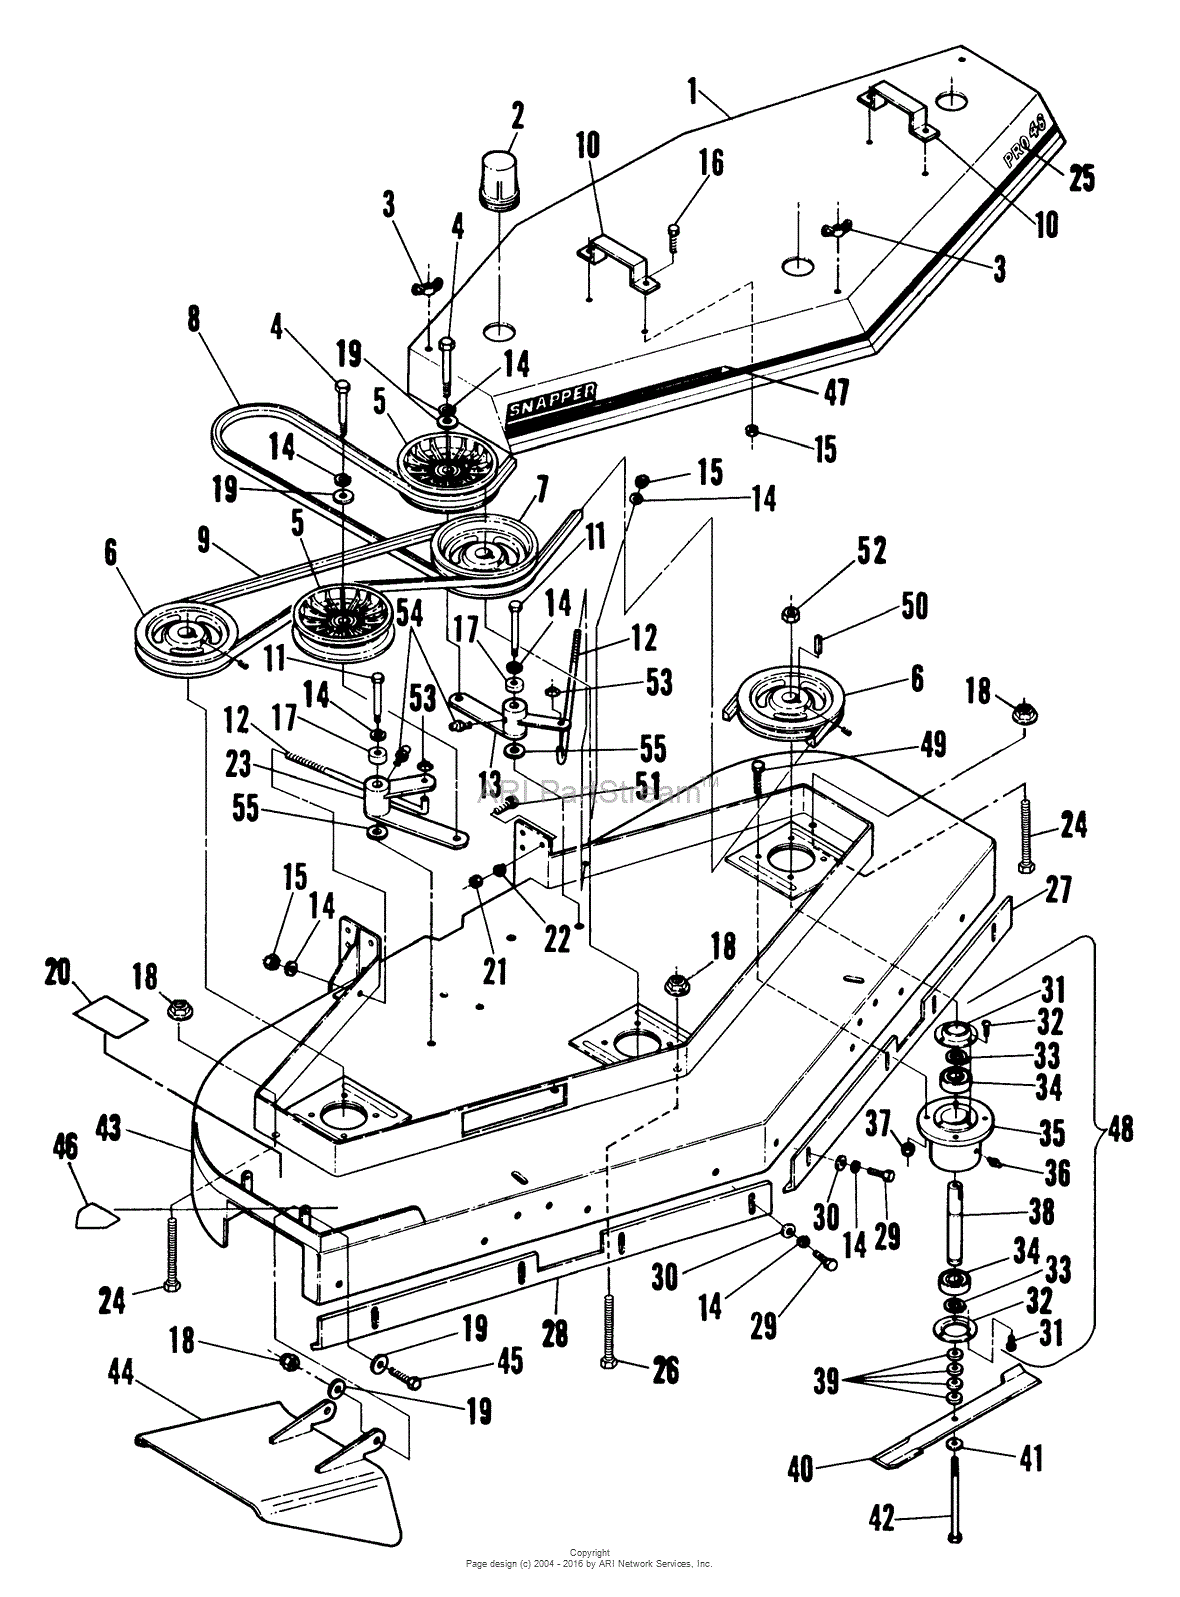 Huskee Riding Lawn Mower Wiring Diagram from az417944.vo.msecnd.net